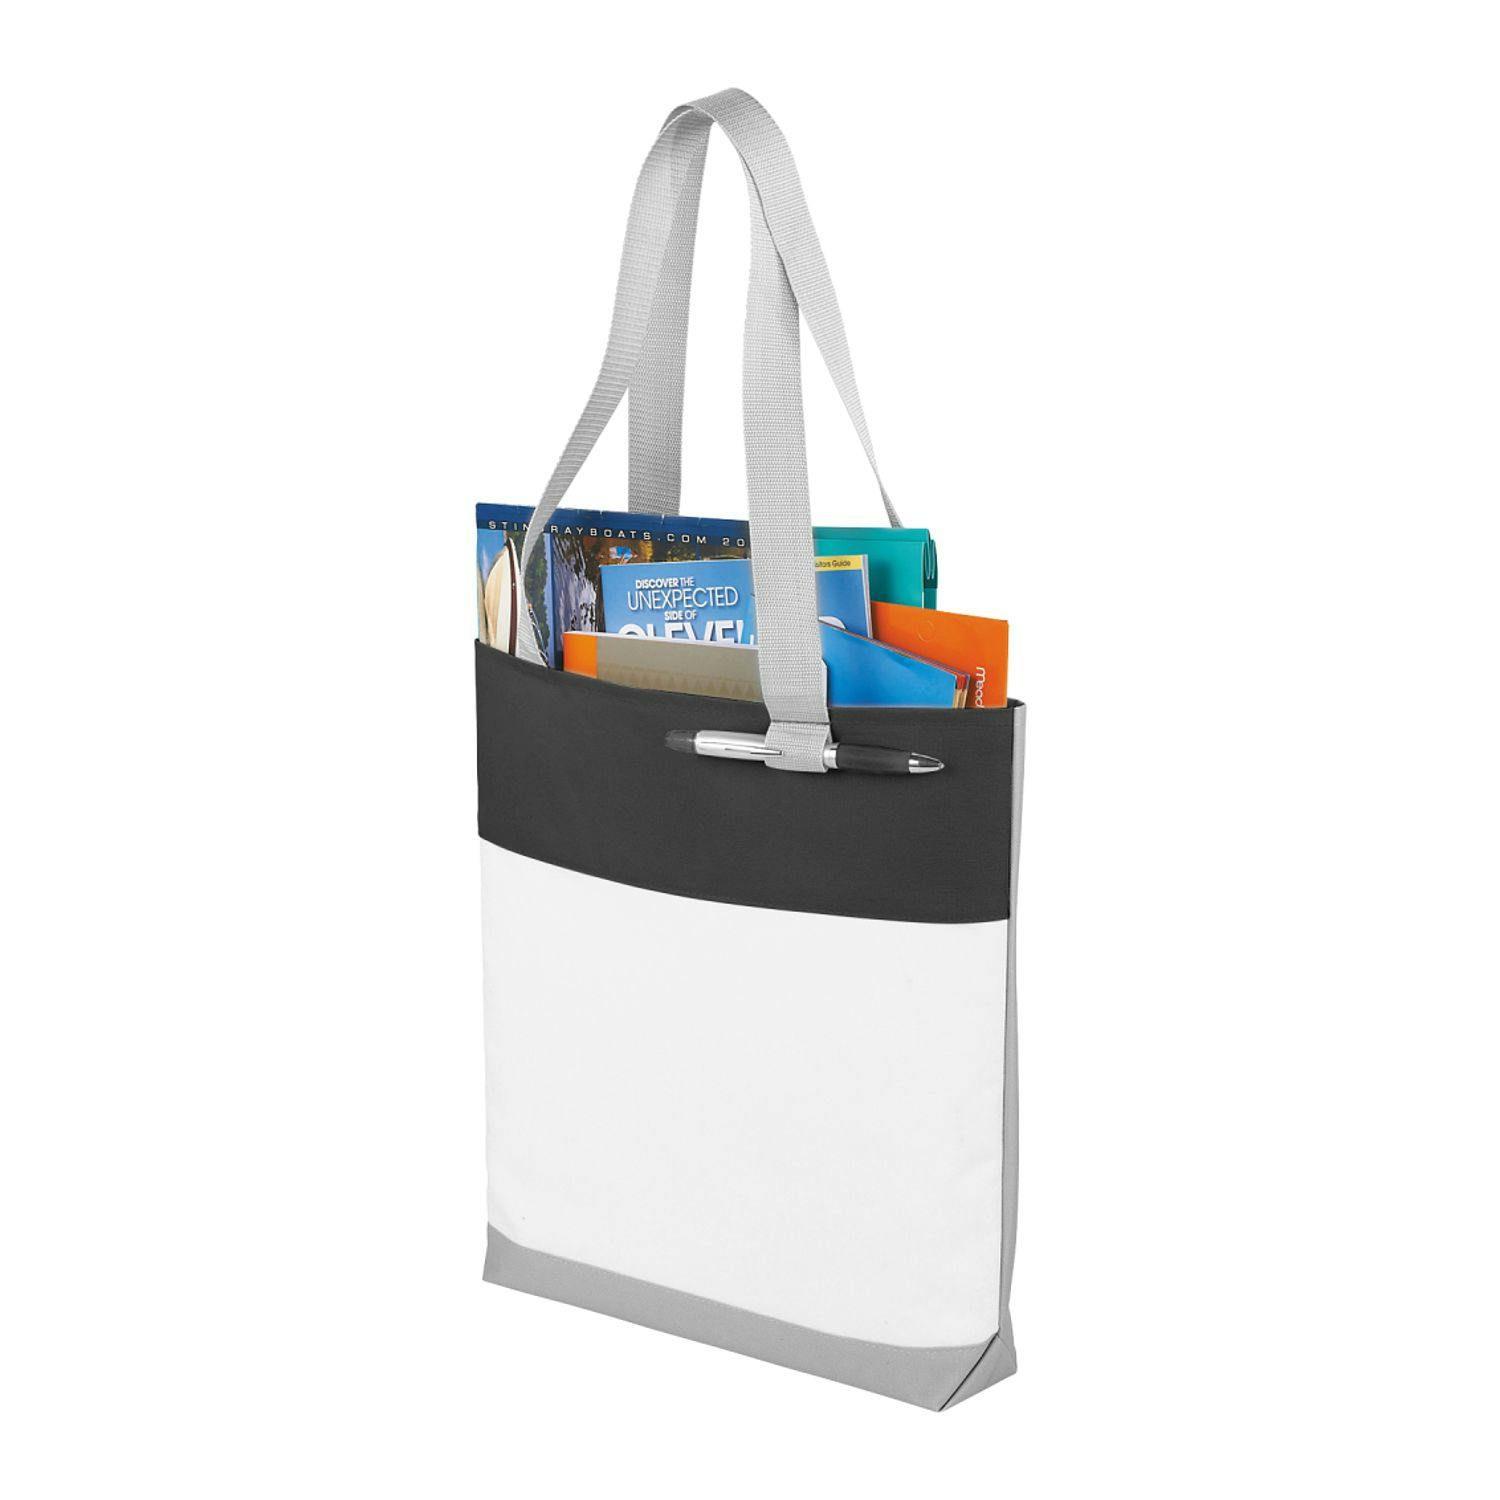 Great White Convention Tote - additional Image 1